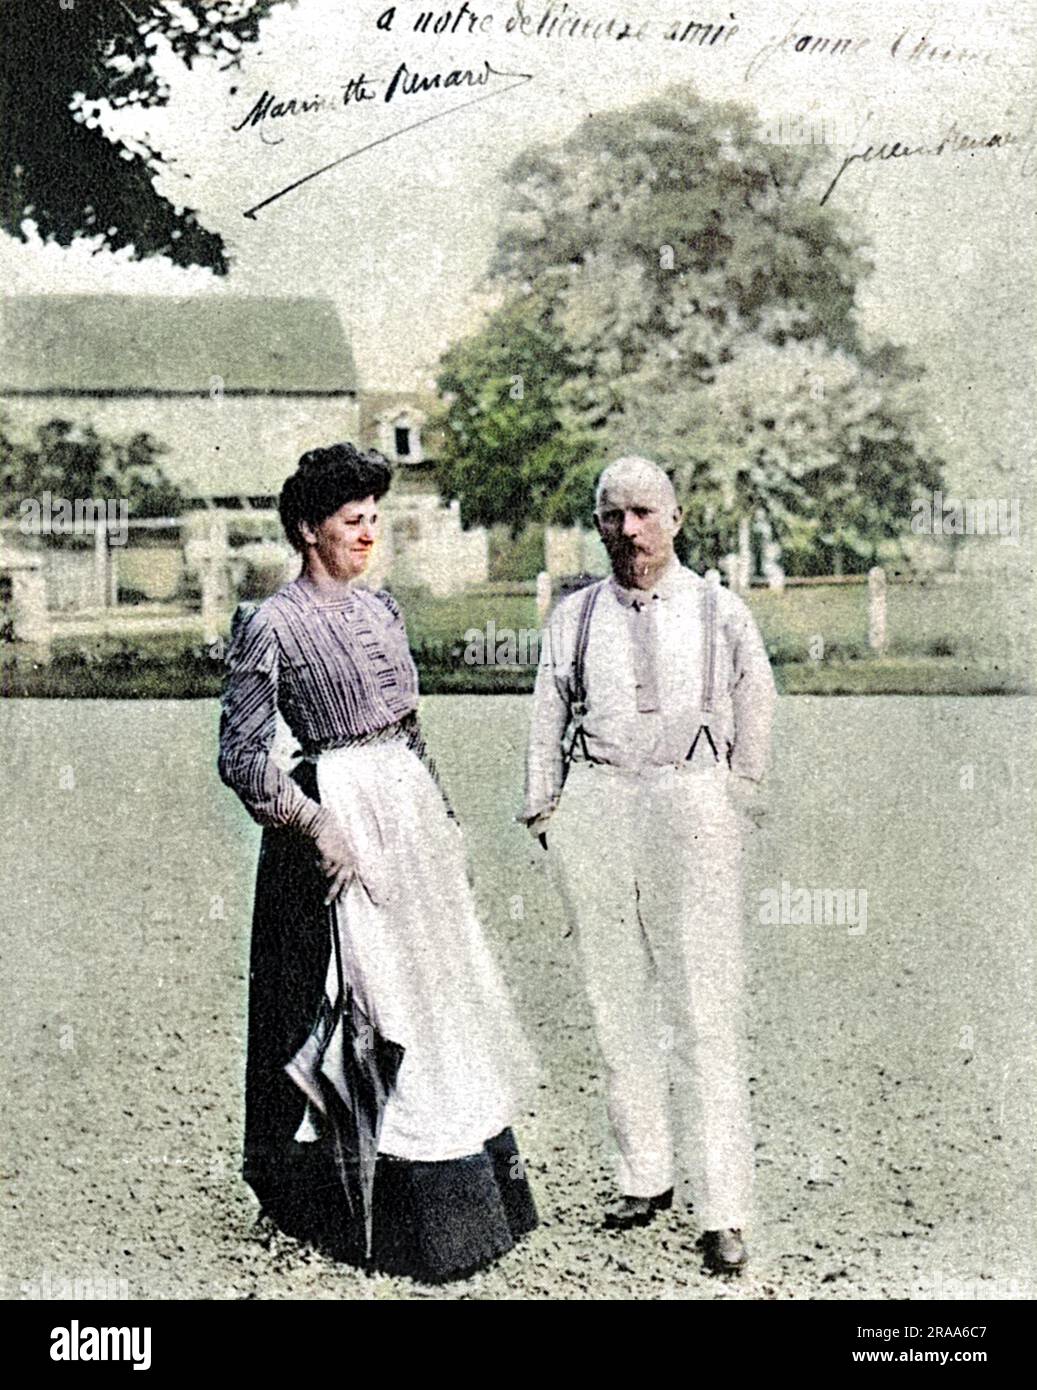 JULES RENARD French writer, author of 'Poil de carotte' and 'Histoires naturelles', with his wife in 1900.     Date: 1864 - 1910 Stock Photo